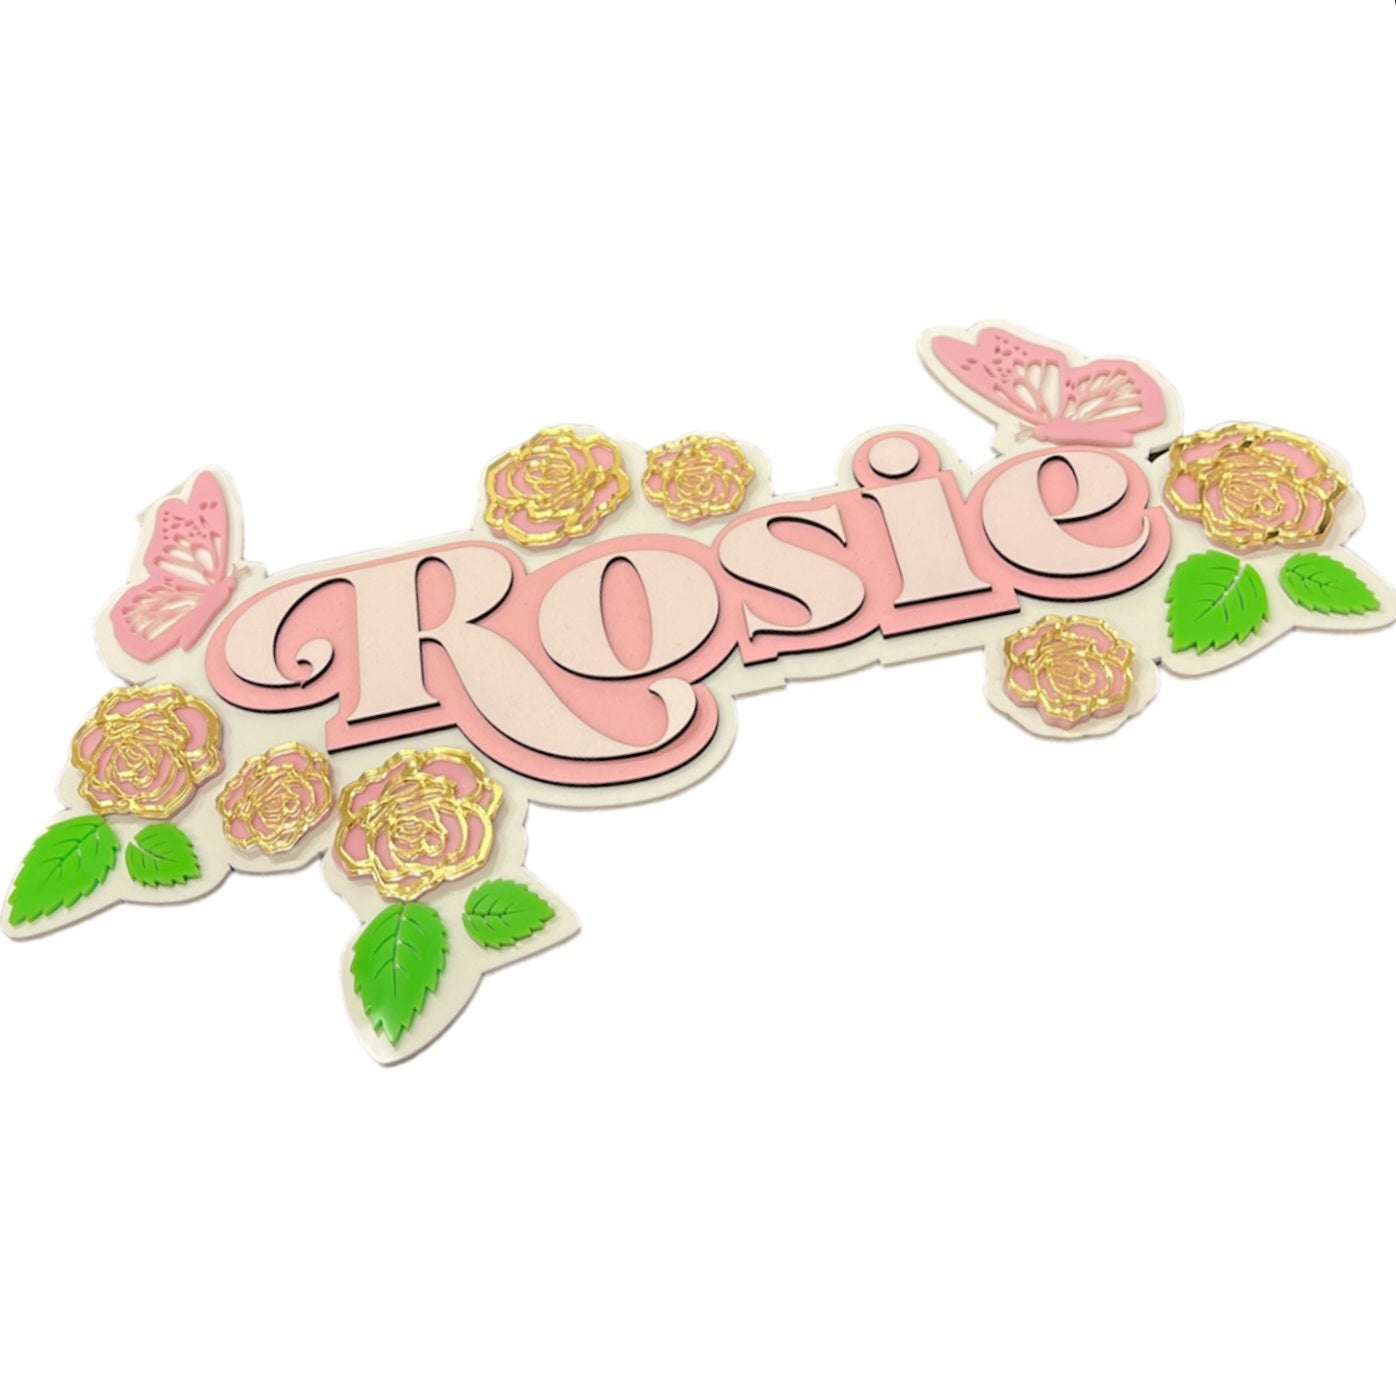 3 Layer Name Plaque- Rose Oasis